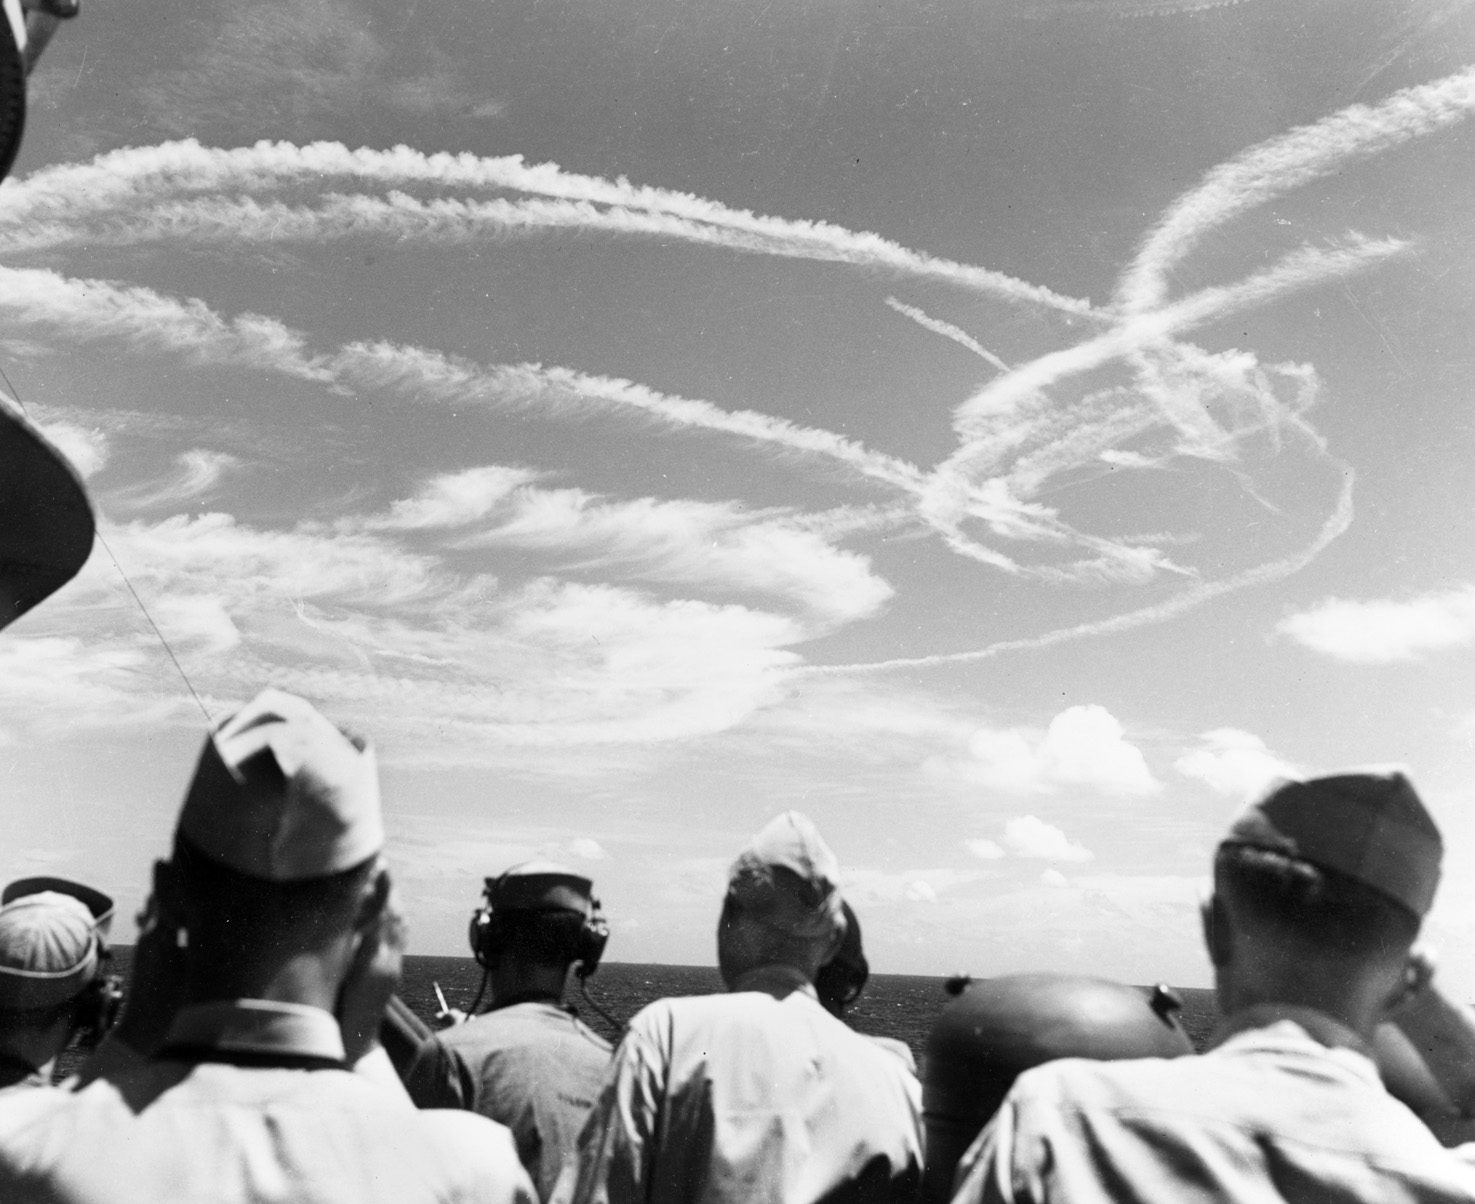 American naval personnel watch the action as white contrails criss-cross the skies while American fighters engage attacking Japanese aircraft. 